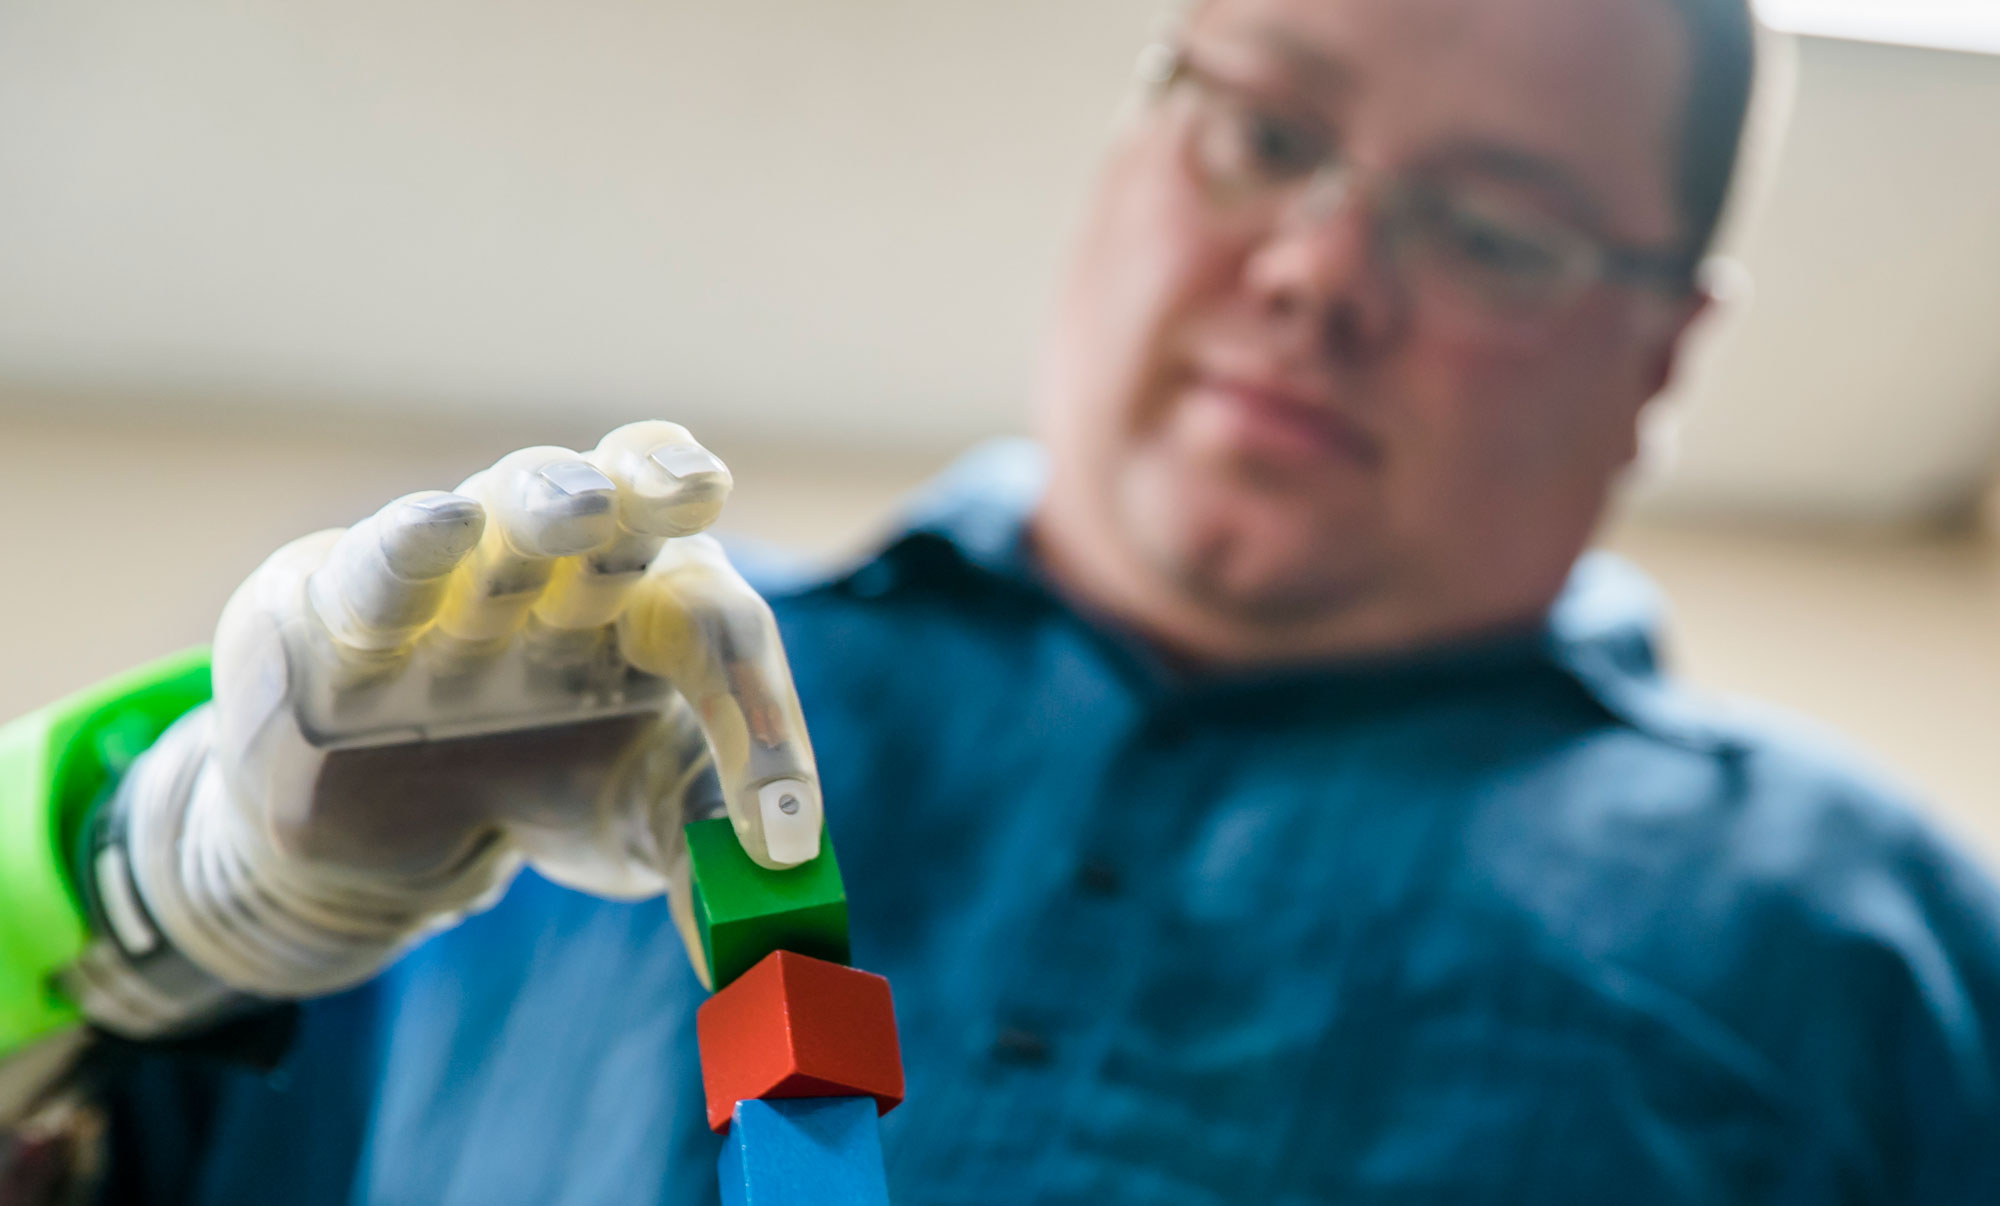 Joe Hamilton, a participant in the University of Michigan RPNI study, uses his mind to
control a DEKA prosthetic hand to pick up a small block